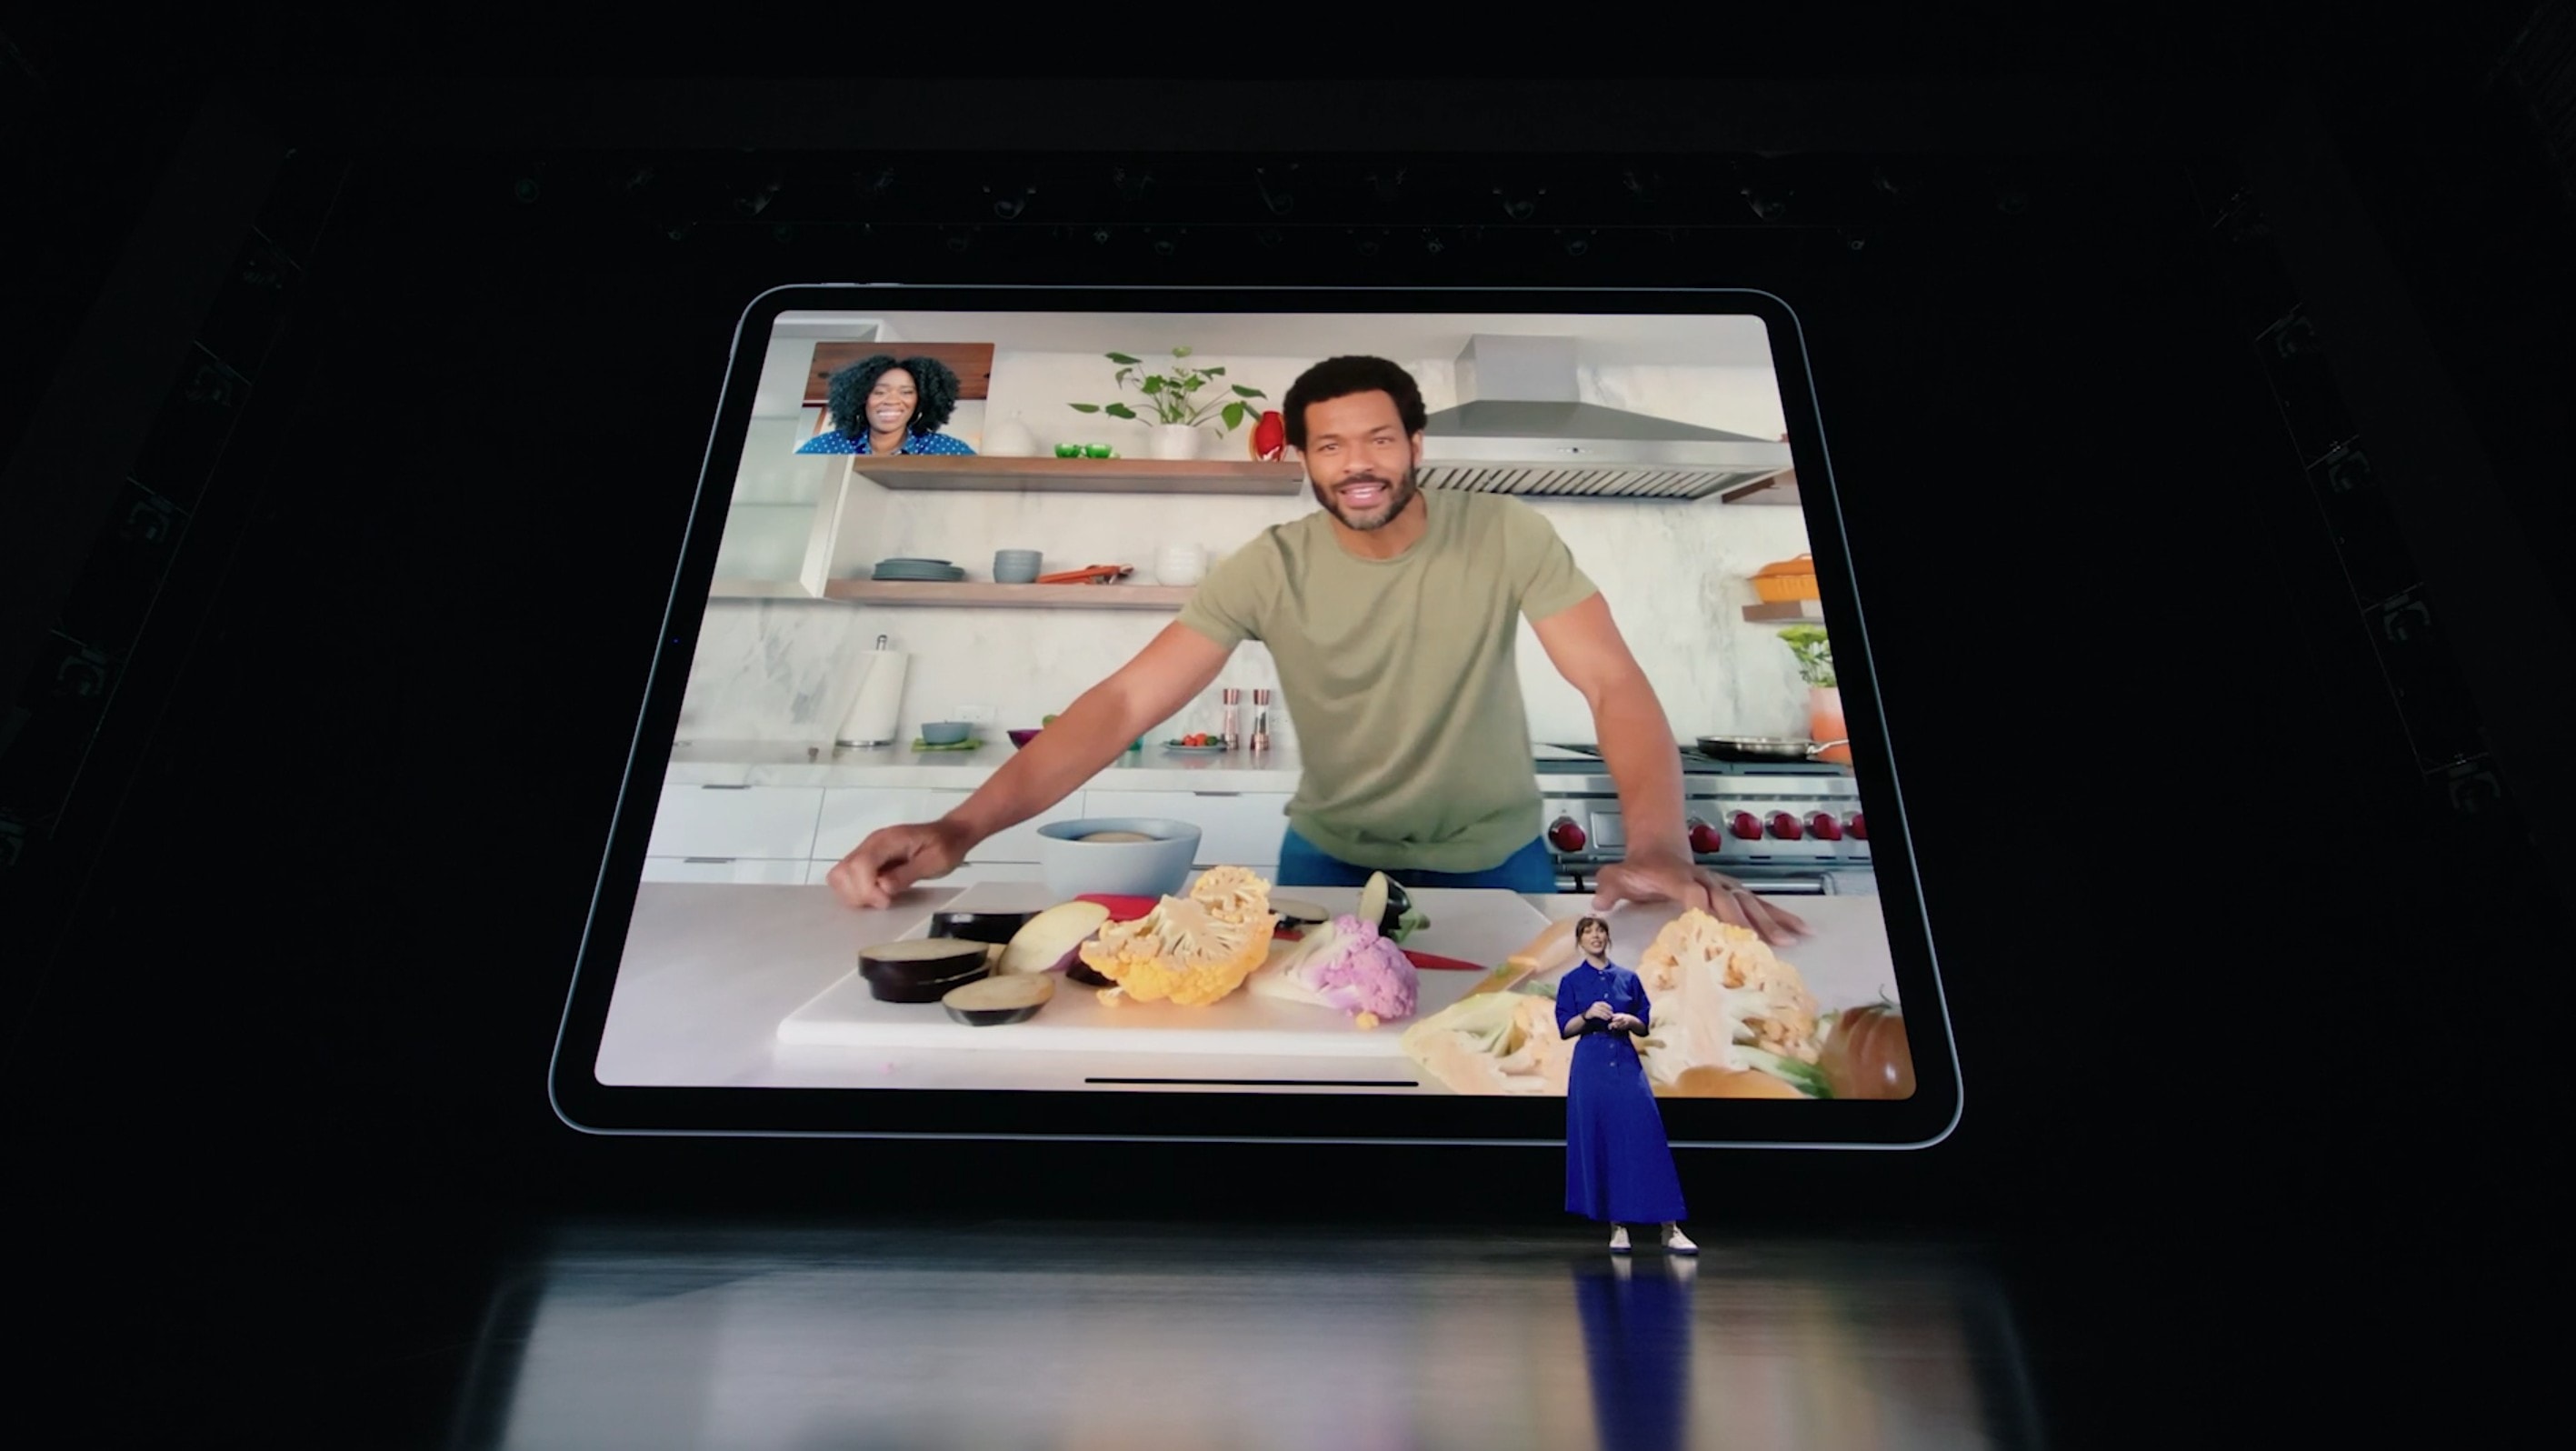 The new iPad Pro's 12MP ultra-wide camera allows a Center Stage feature that follows you around the room during video calls.